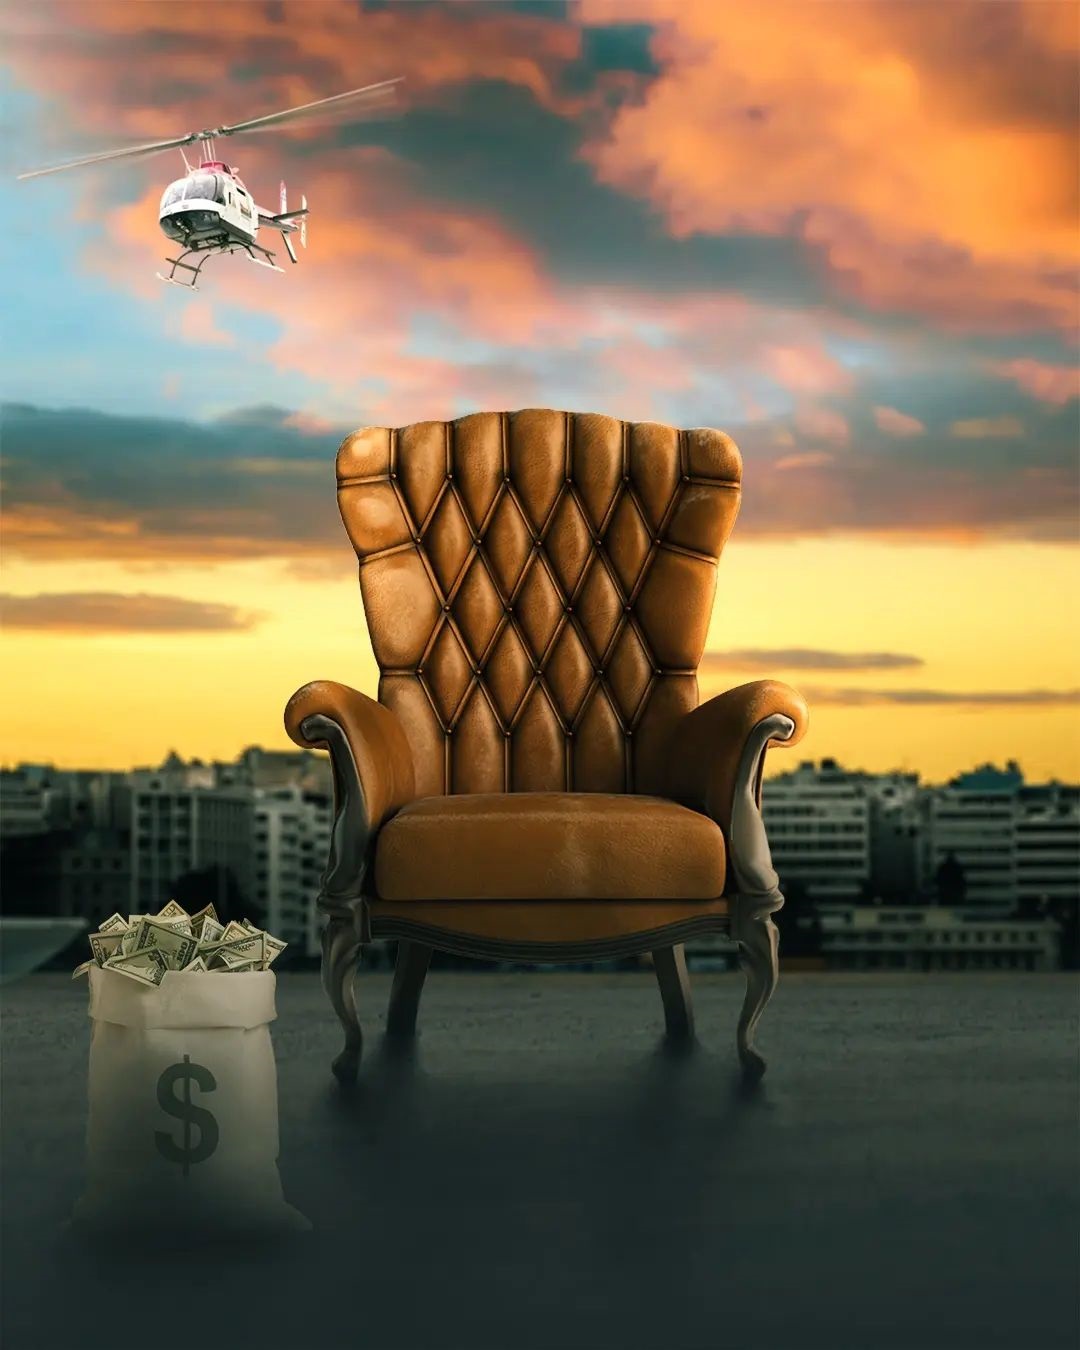  King Chair Sunset Sky Photo Editing Background Download | CBEditz